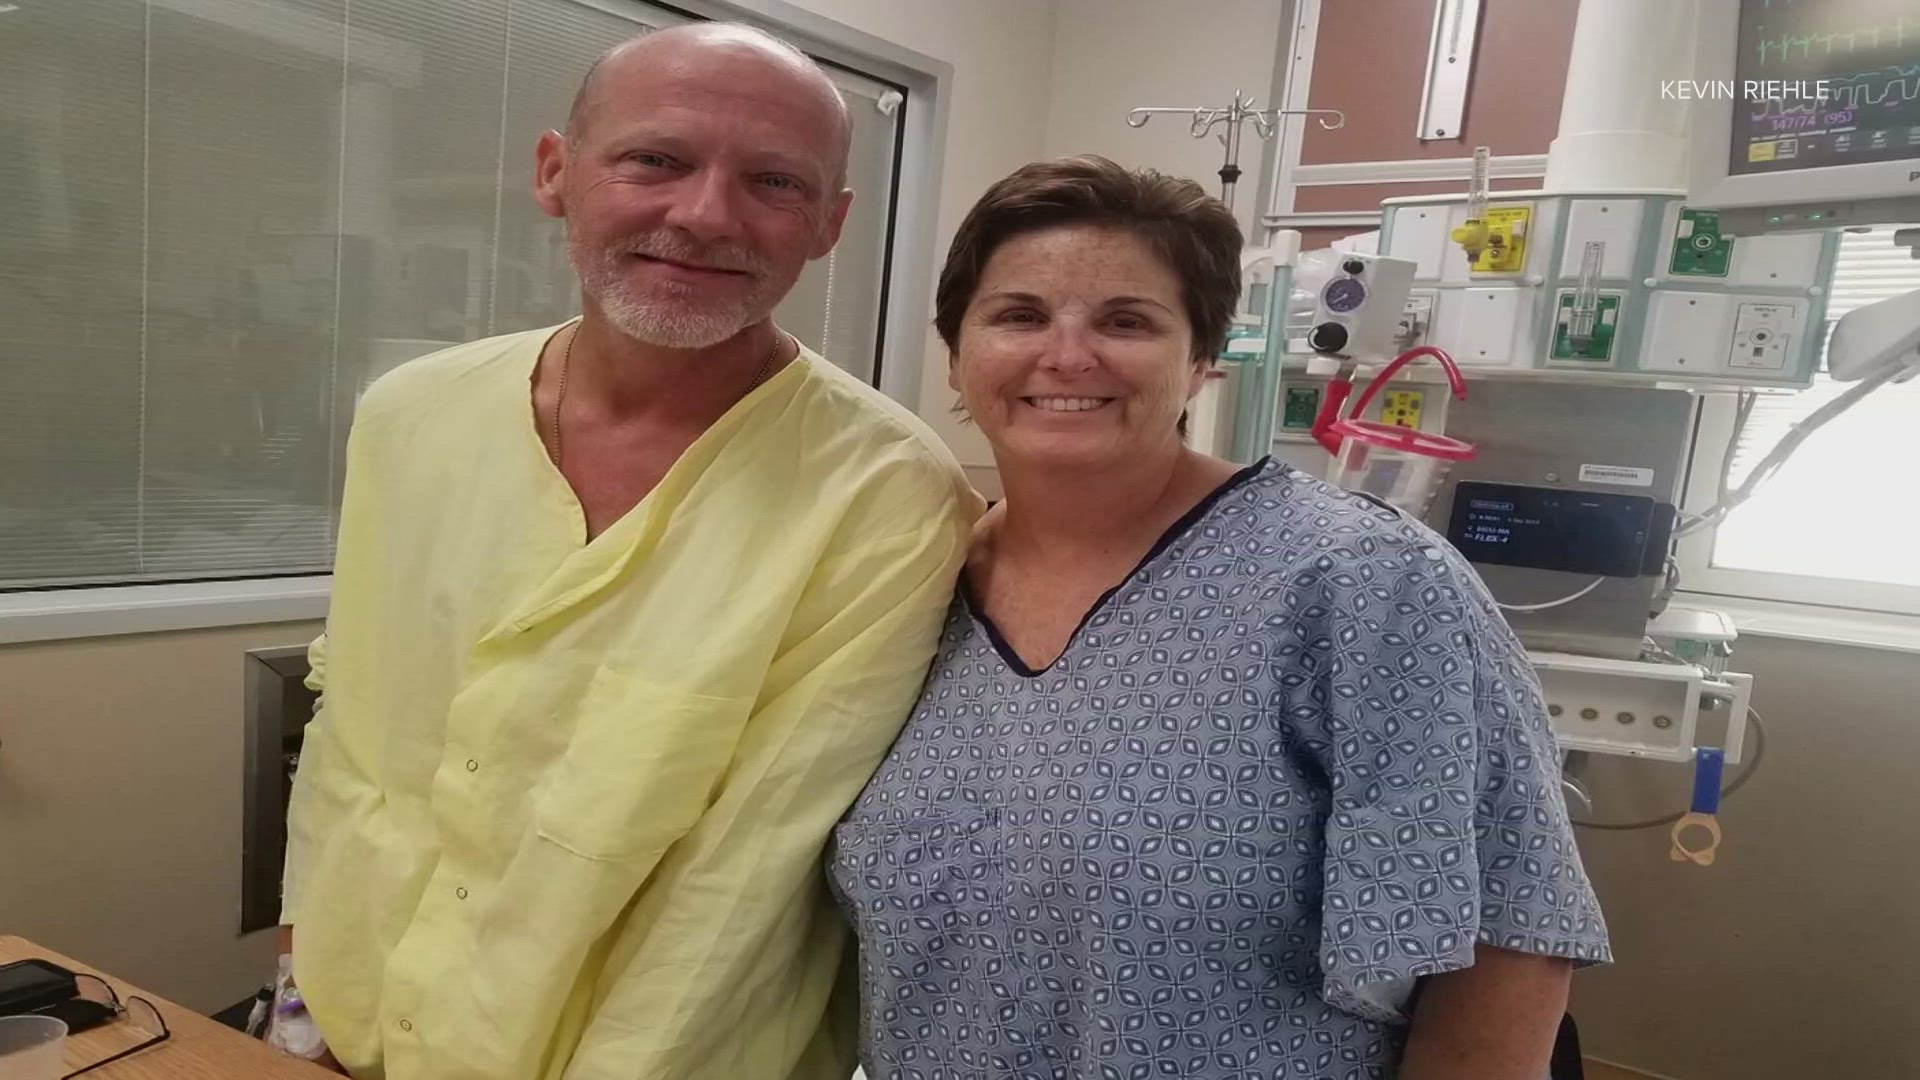 When Tammy Oprish saw that Kevin Riehle, a fellow veteran, was in need of a life-saving kidney transplant, she knew she needed to do something.